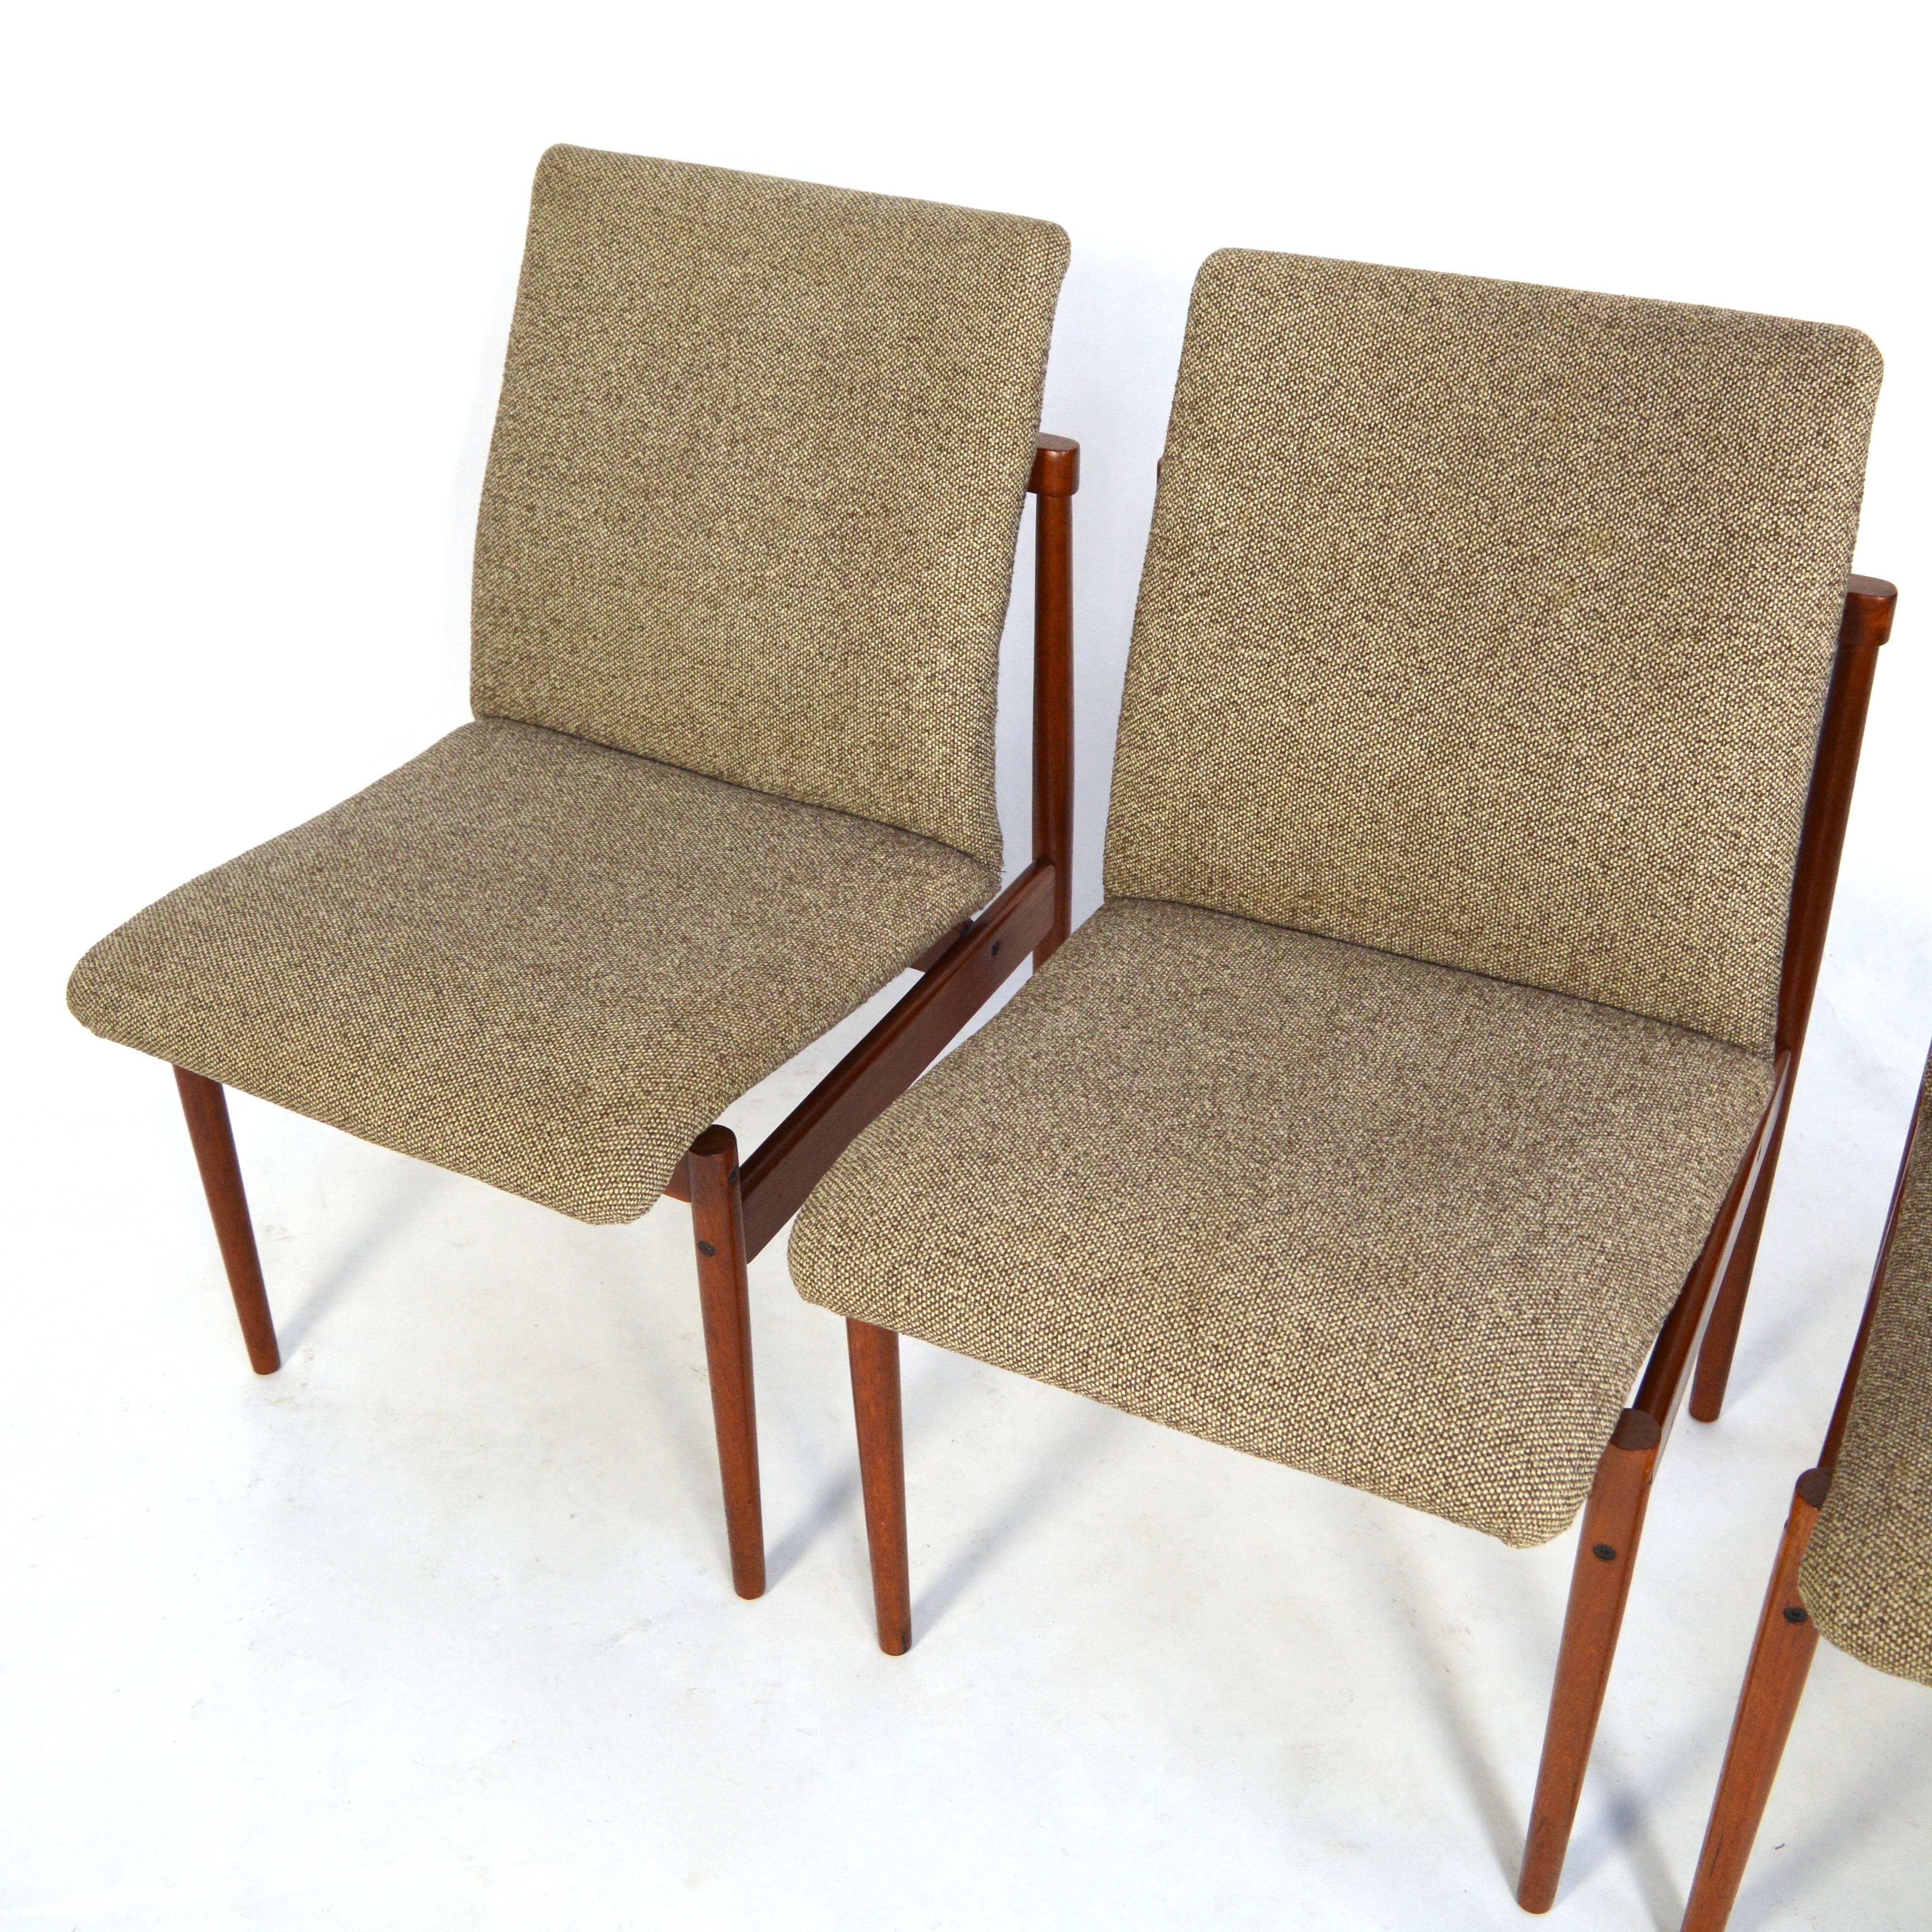 Dutch Set of Four Teak Dining Chairs by Thereca, 1960s